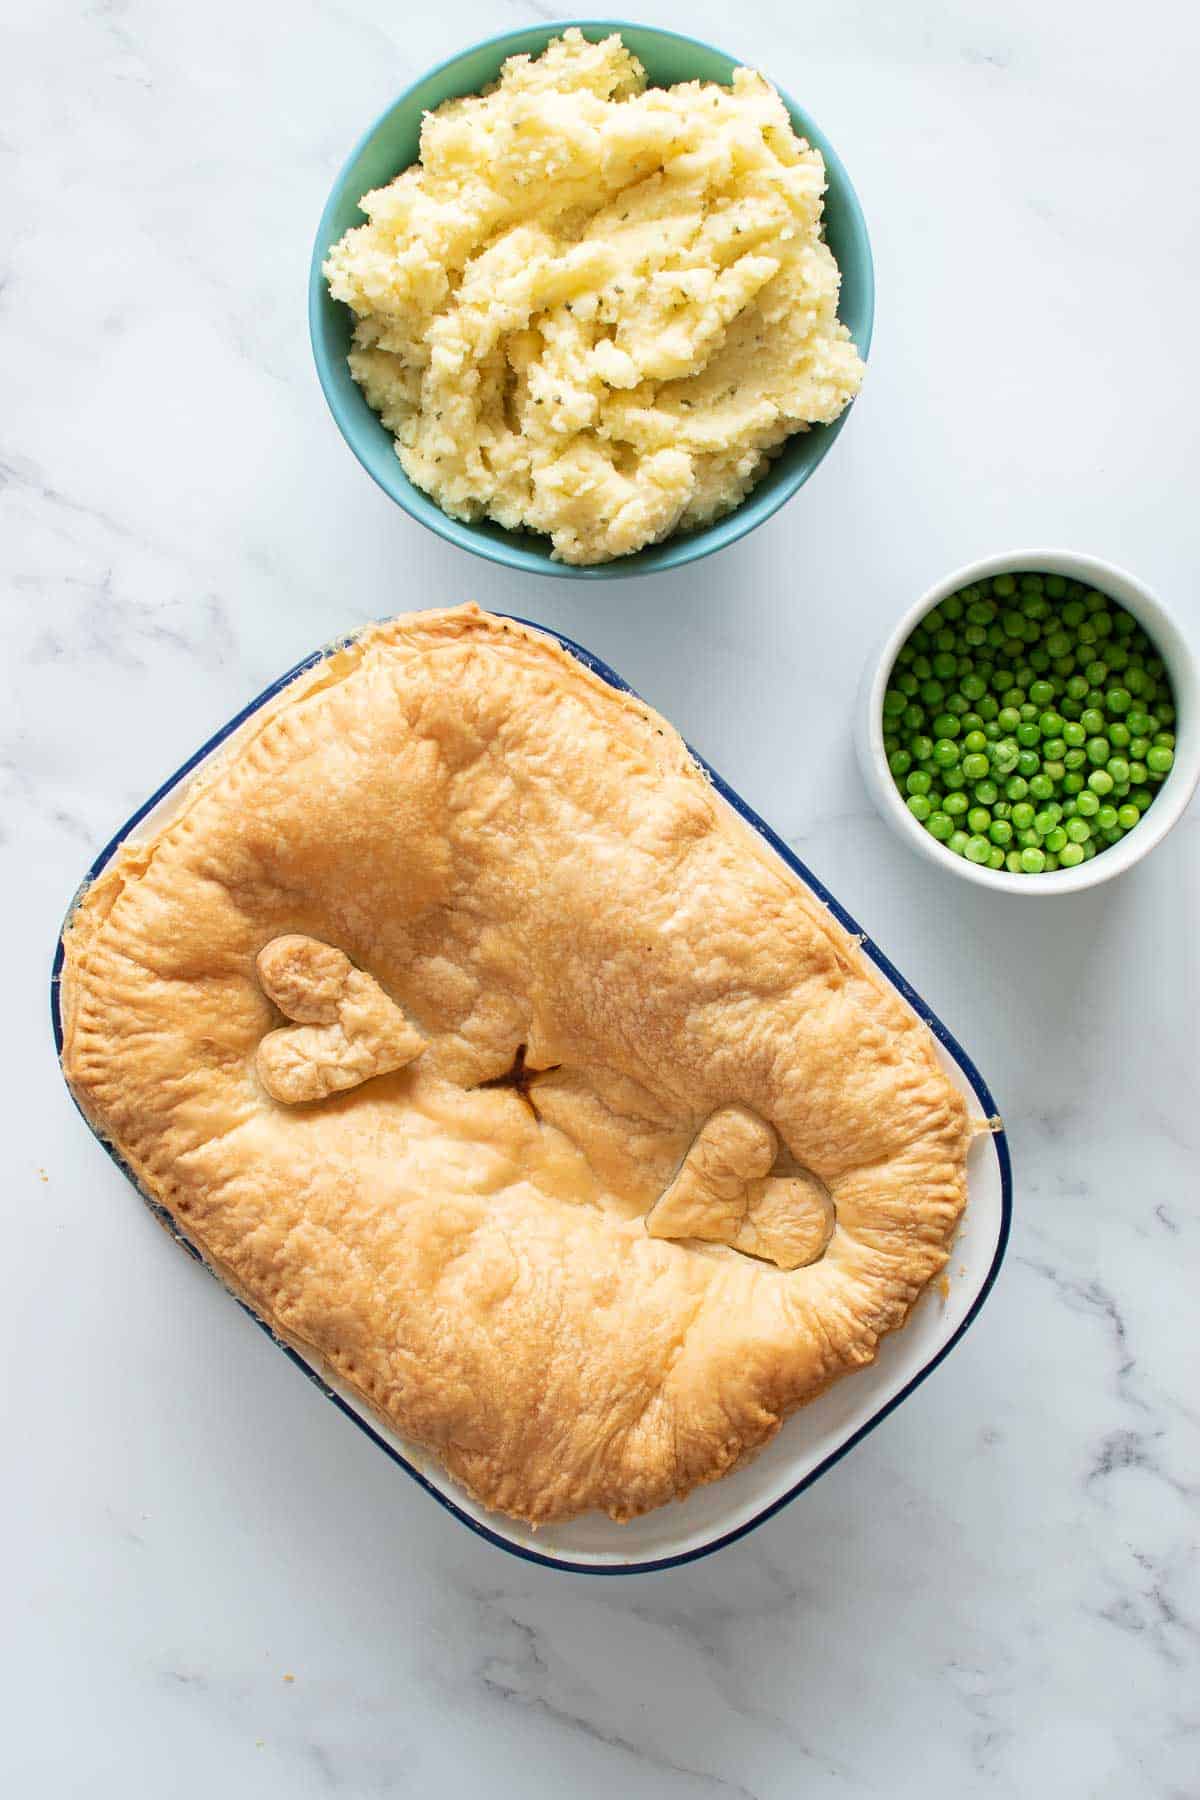 A whole beef pie with mash and peas on the side.